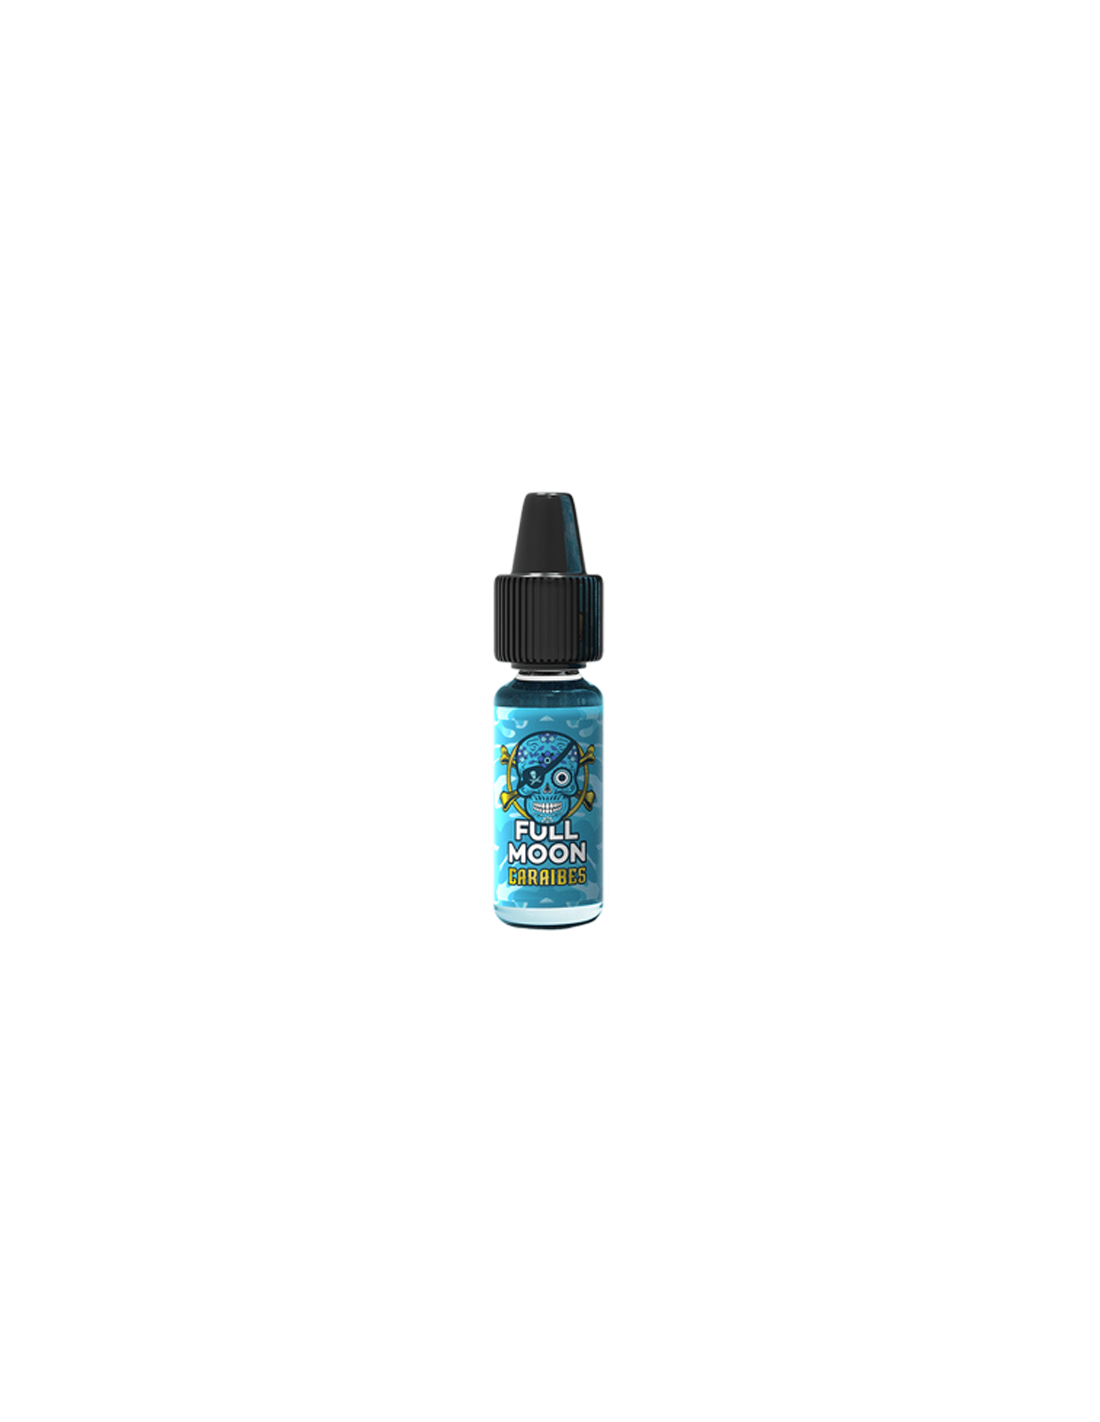 Full Moon Caraibes Pirate Aroma Concentrato 10ml Rum Ananas Cocco